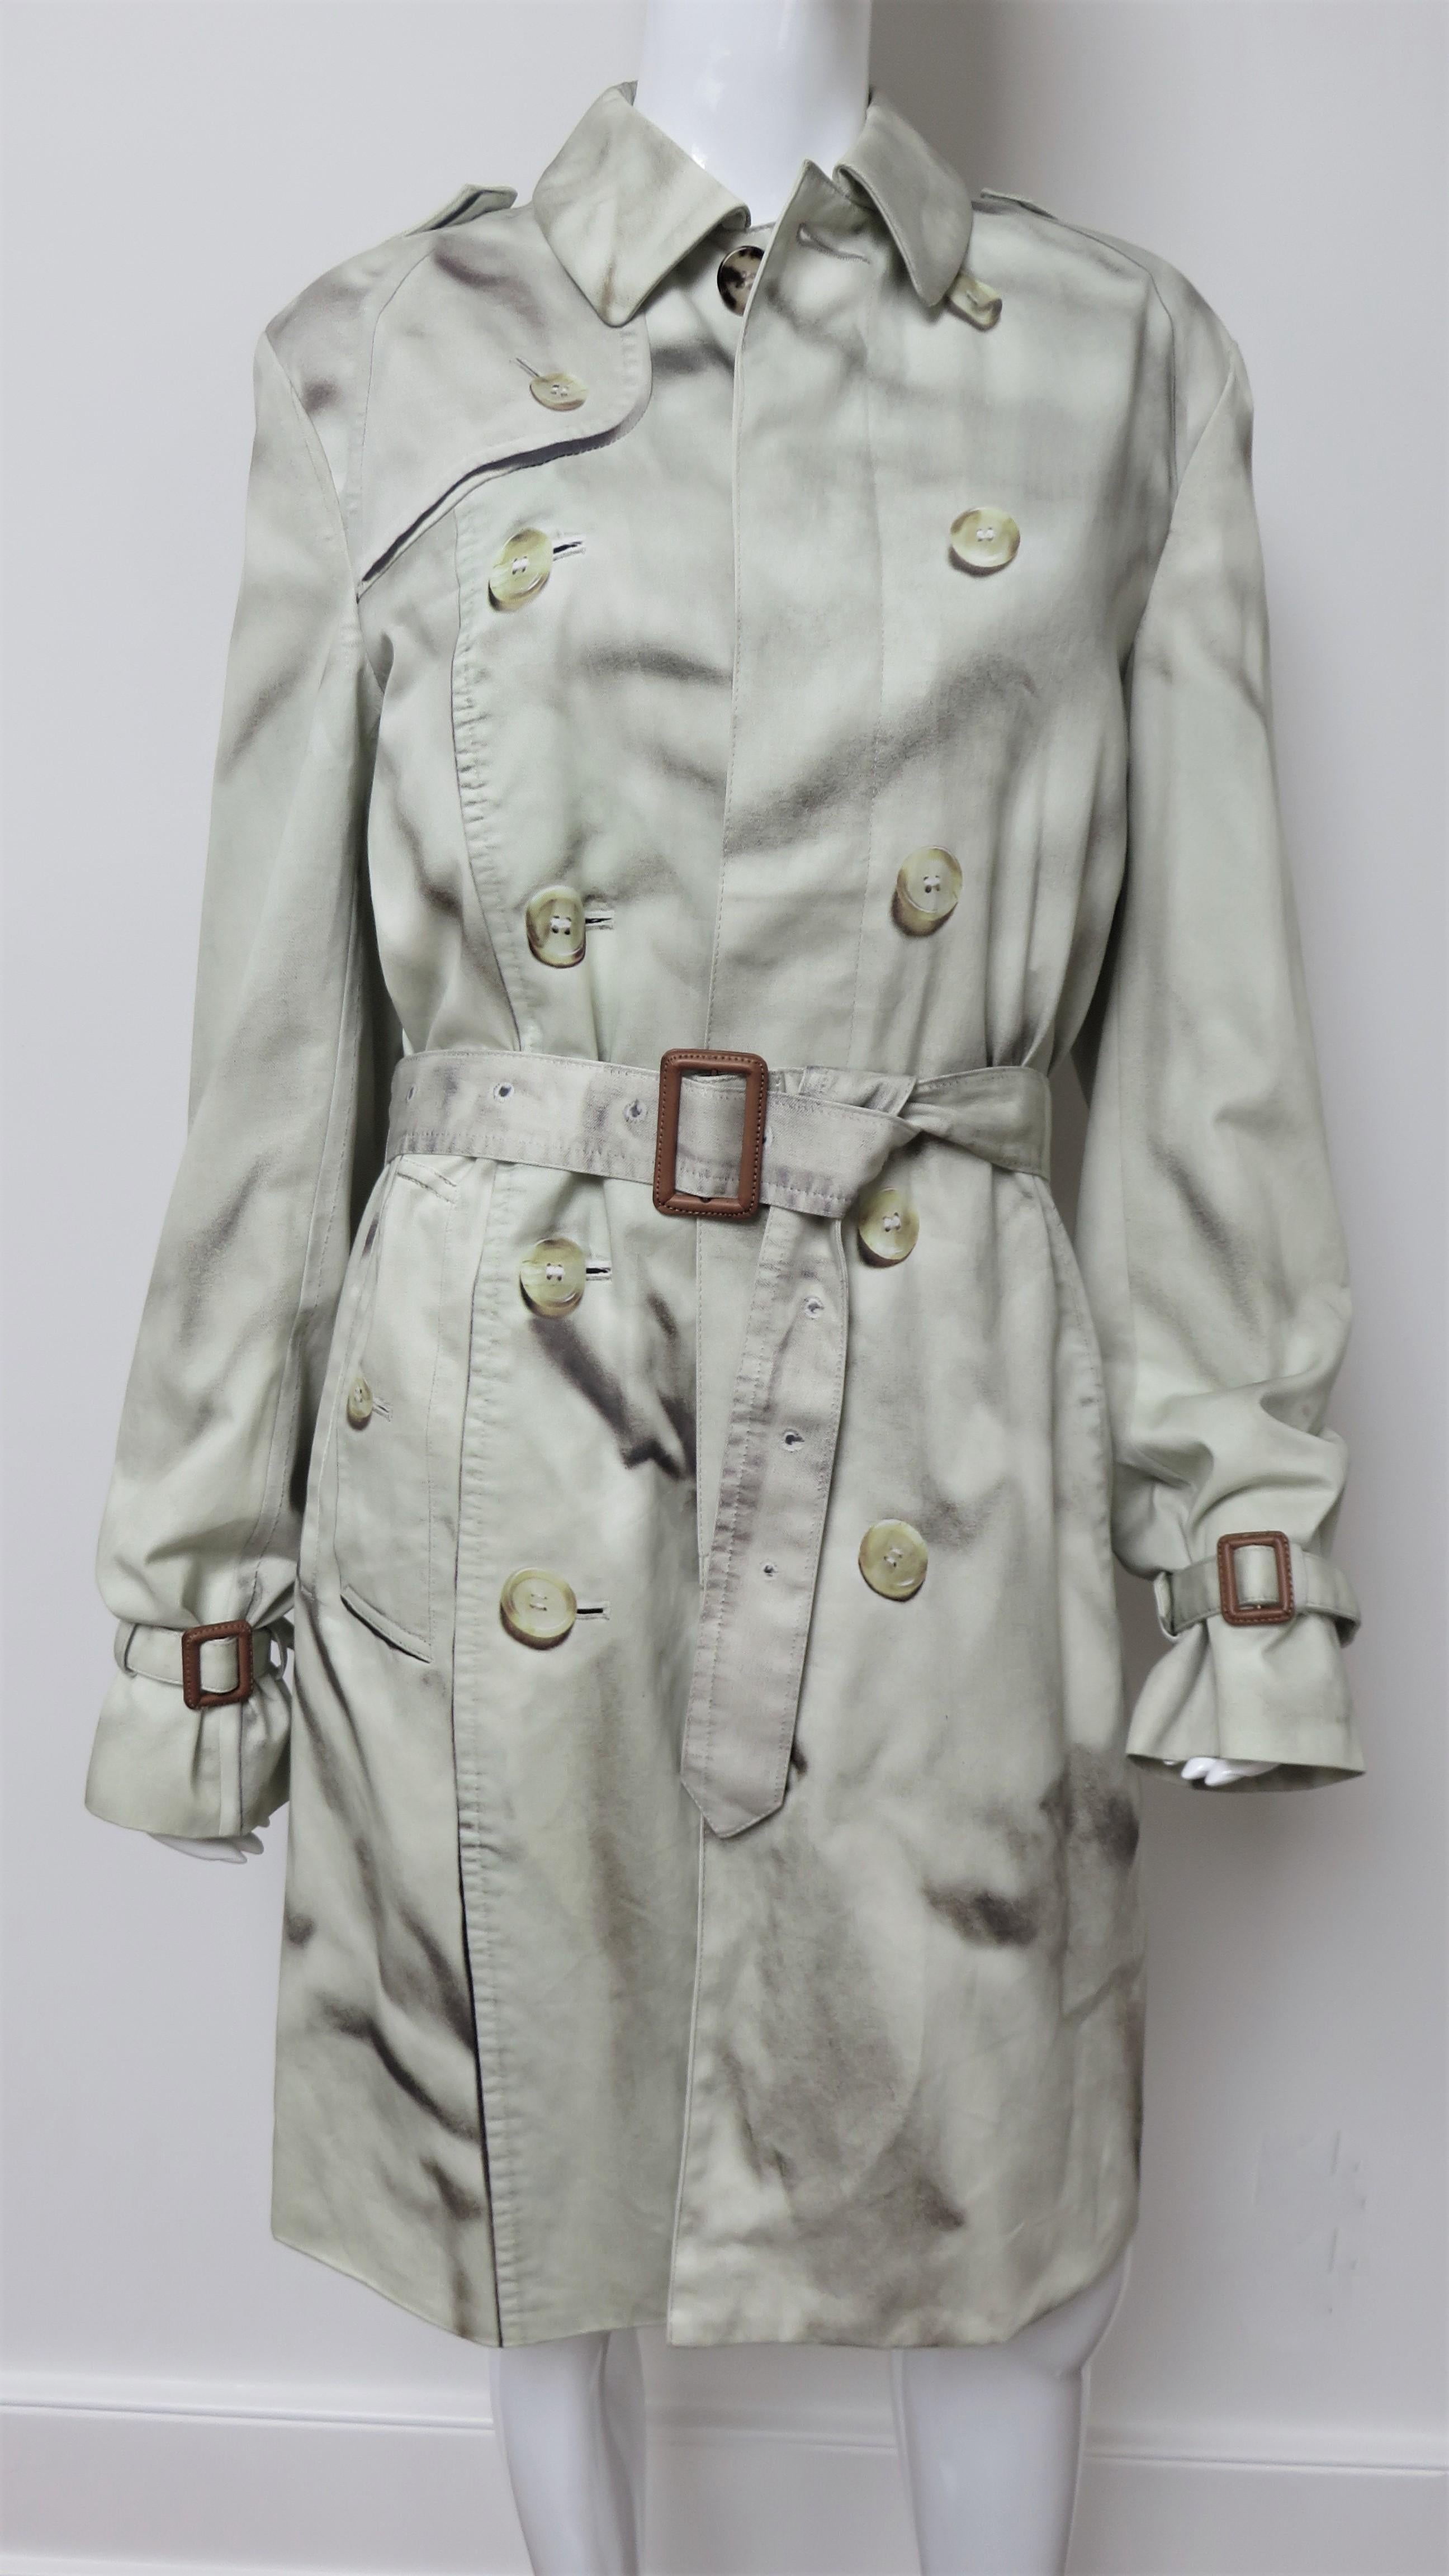 A fabulous beige and black cotton trompe l'oeil trench coat jacket from Japanese designers Naoki Ichihara, Tadanao Yamashita and Shingo Otsuka for TALK ABOUT THE DISTRACTION.  It appears as a double breasted coat but the buttons, buttonholes, folds